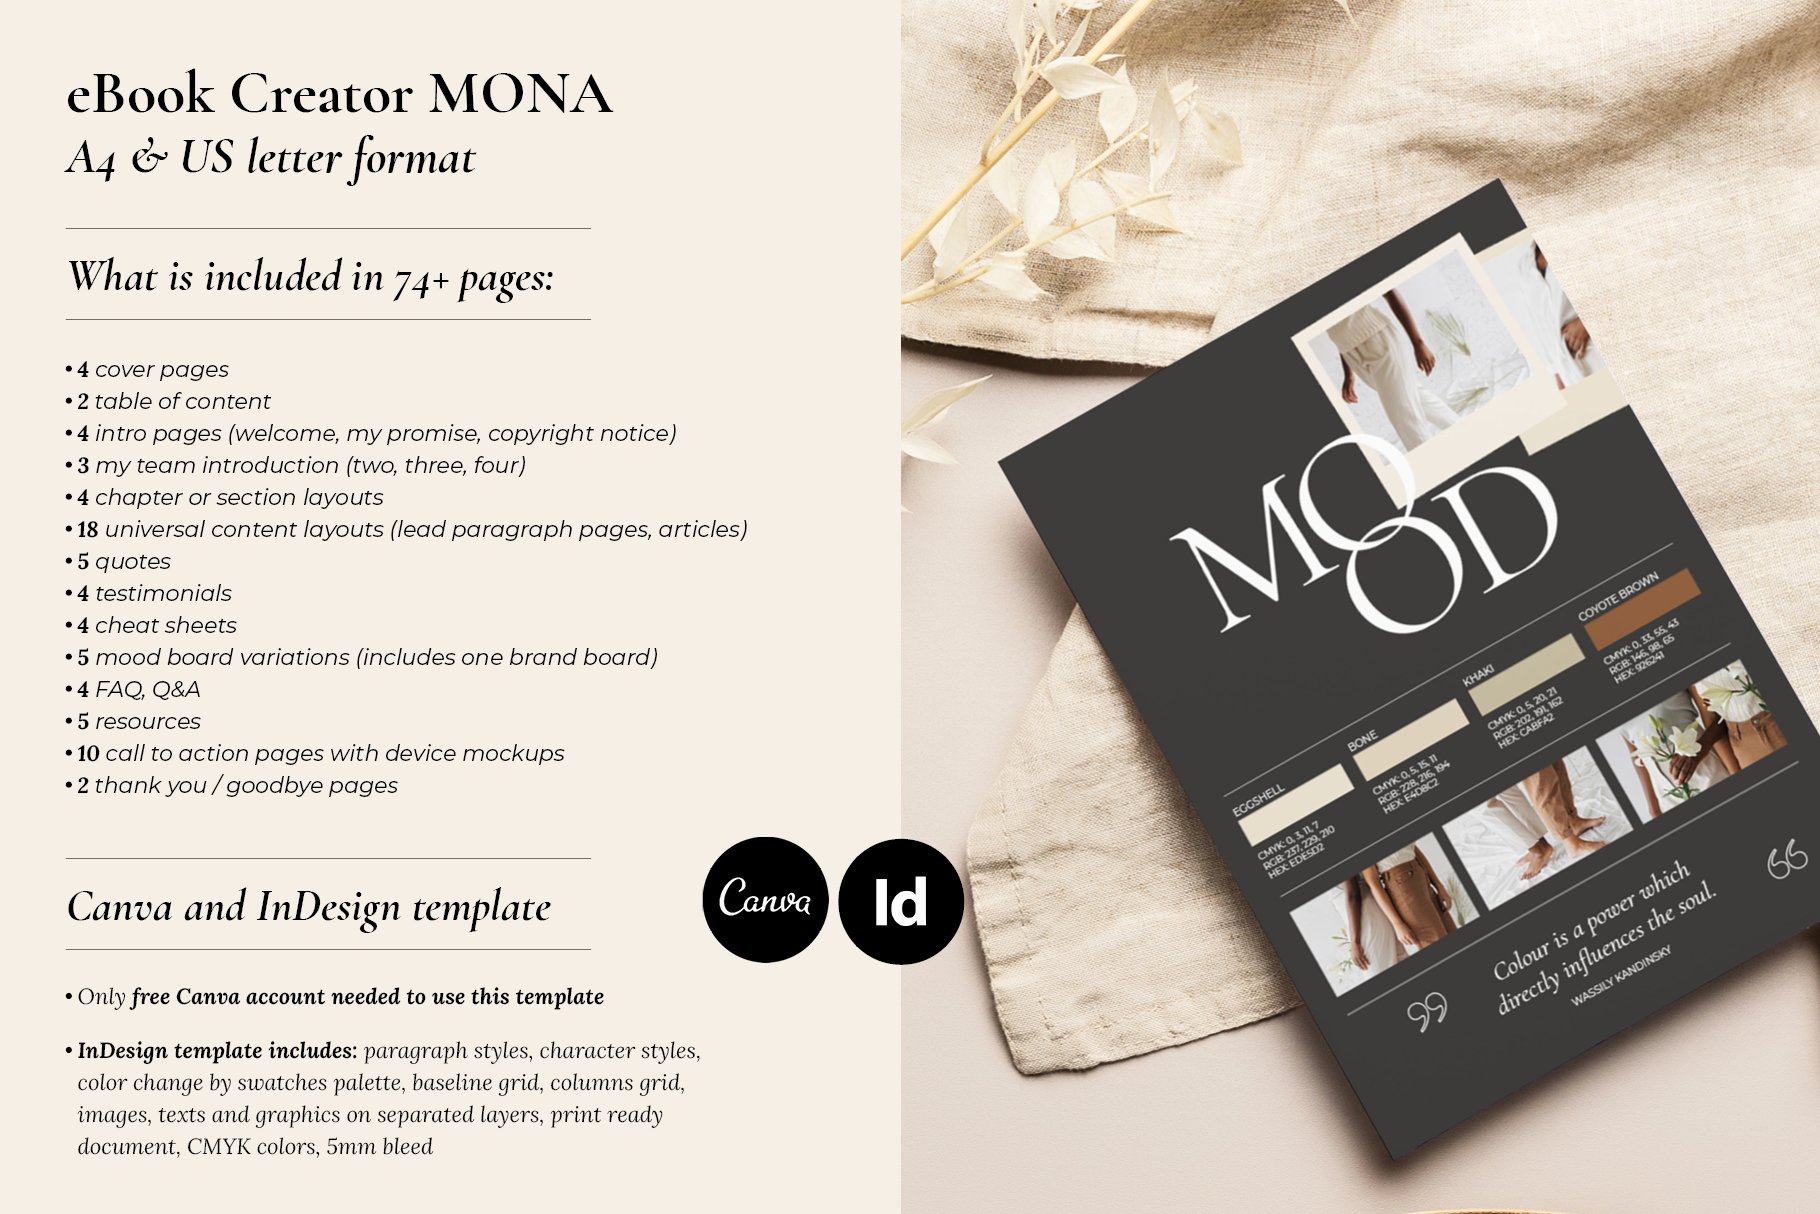 eBook for Coach / CANVA, INDD / Mona preview image.